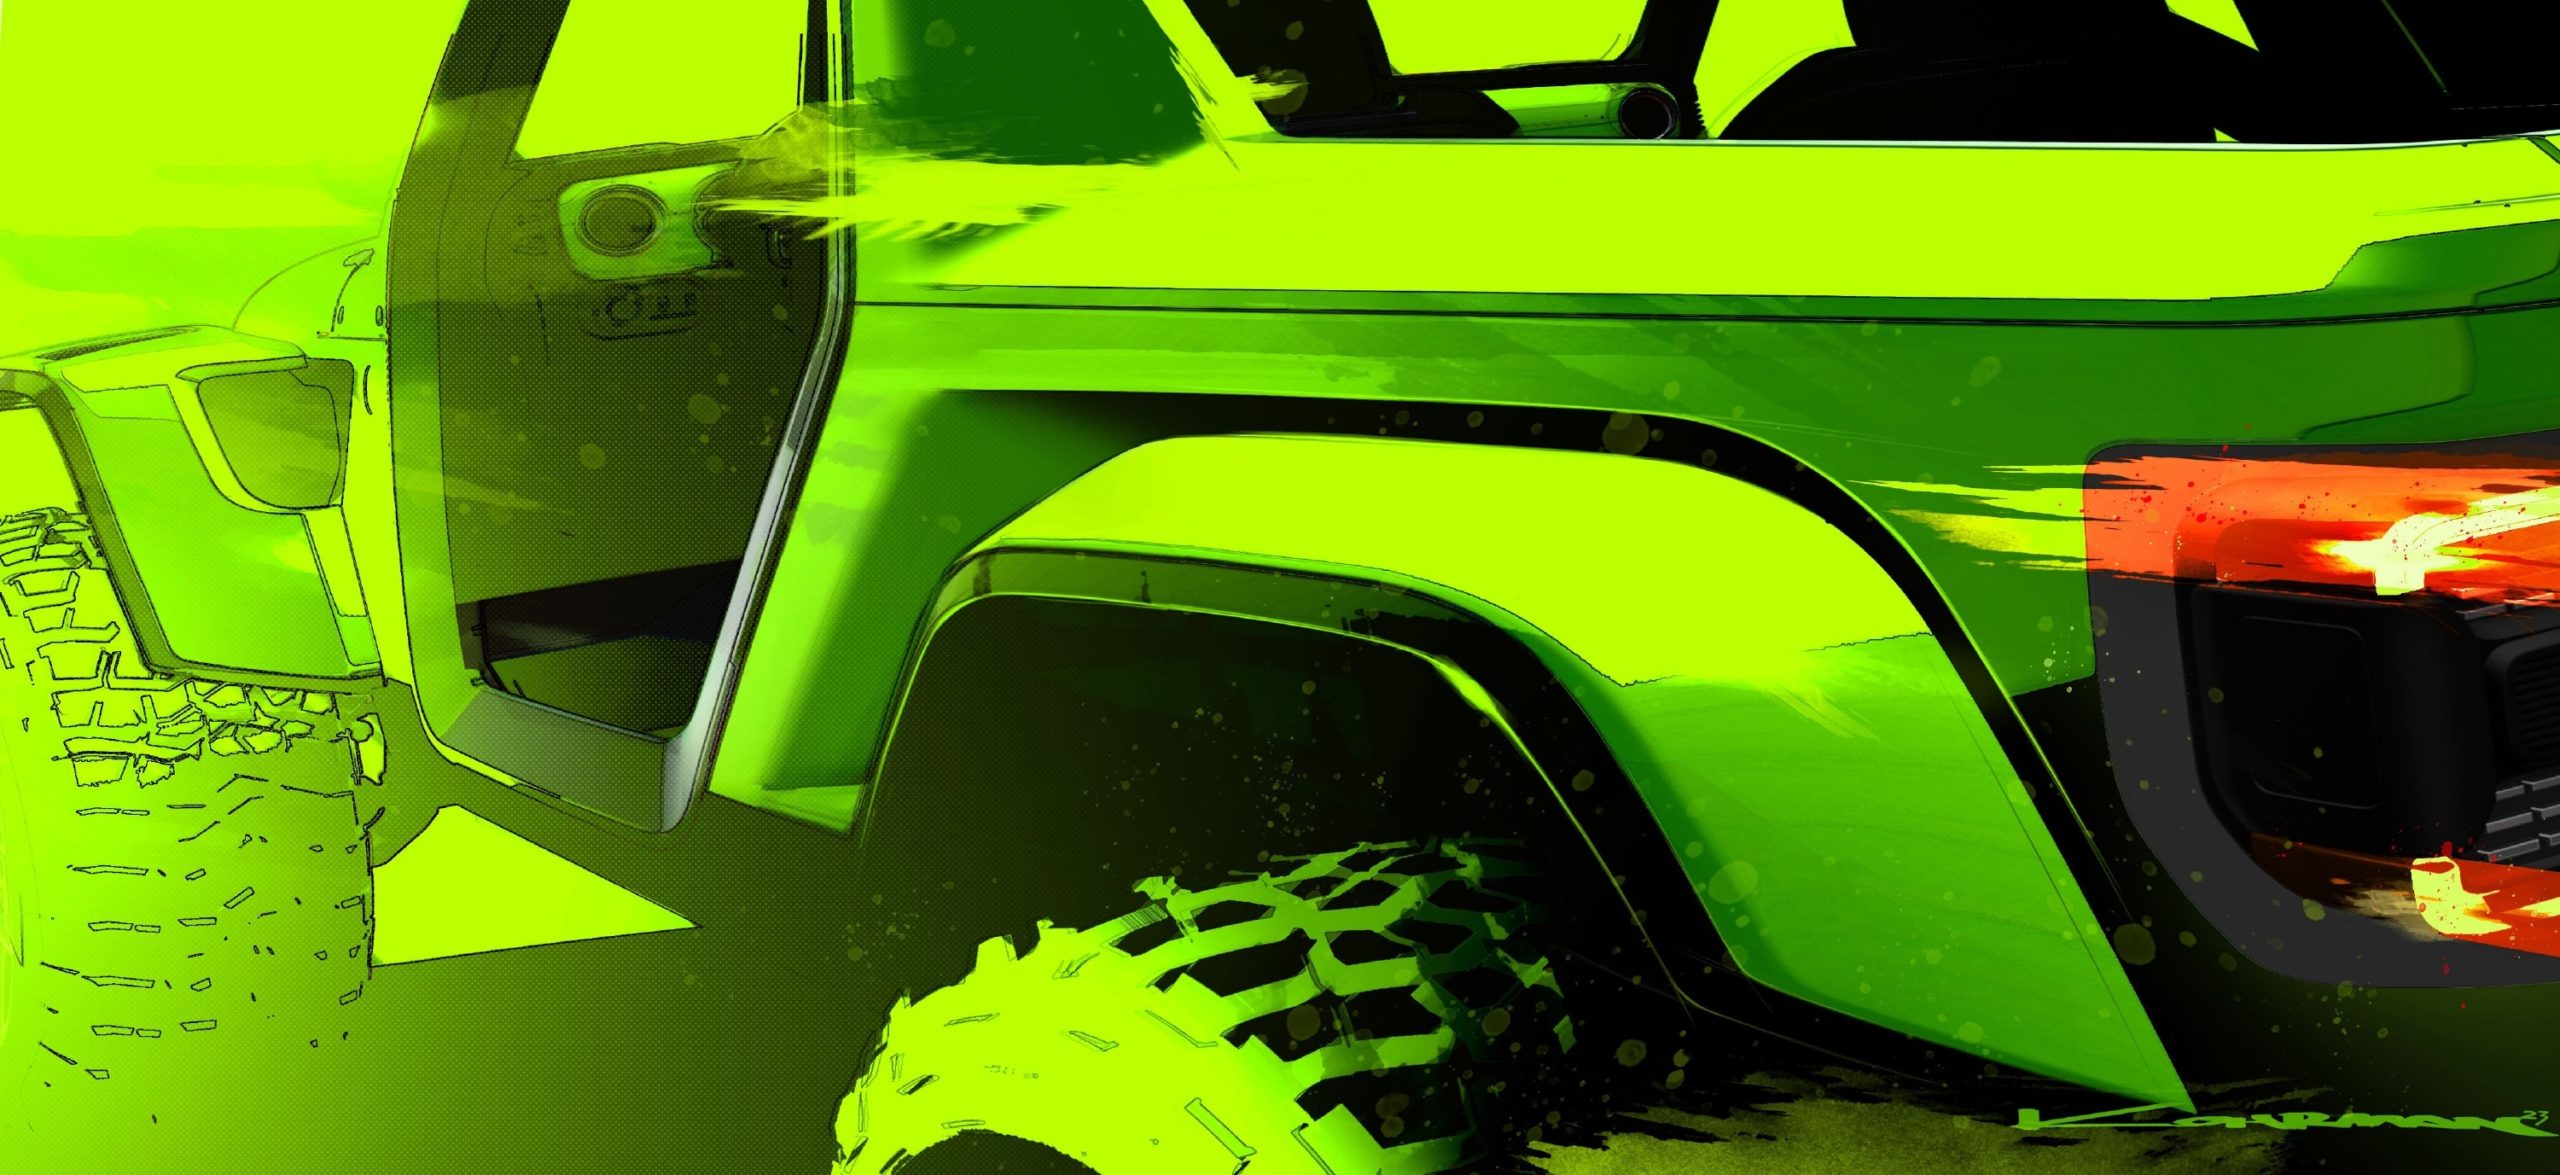 Trail time! The first Jeep® brand and Jeep Performance Parts by Mopar concept sketches hint at two of the several new concept vehicles heading to the 57th annual Easter Jeep Safari, scheduled for April 1-9, 2023 in Moab, Utah. One of which is set to conquer Moab’s tumultuous backcountry trails in absolute silence, and further highlights the Jeep brand’s vision of accomplishing Zero Emission Freedom.